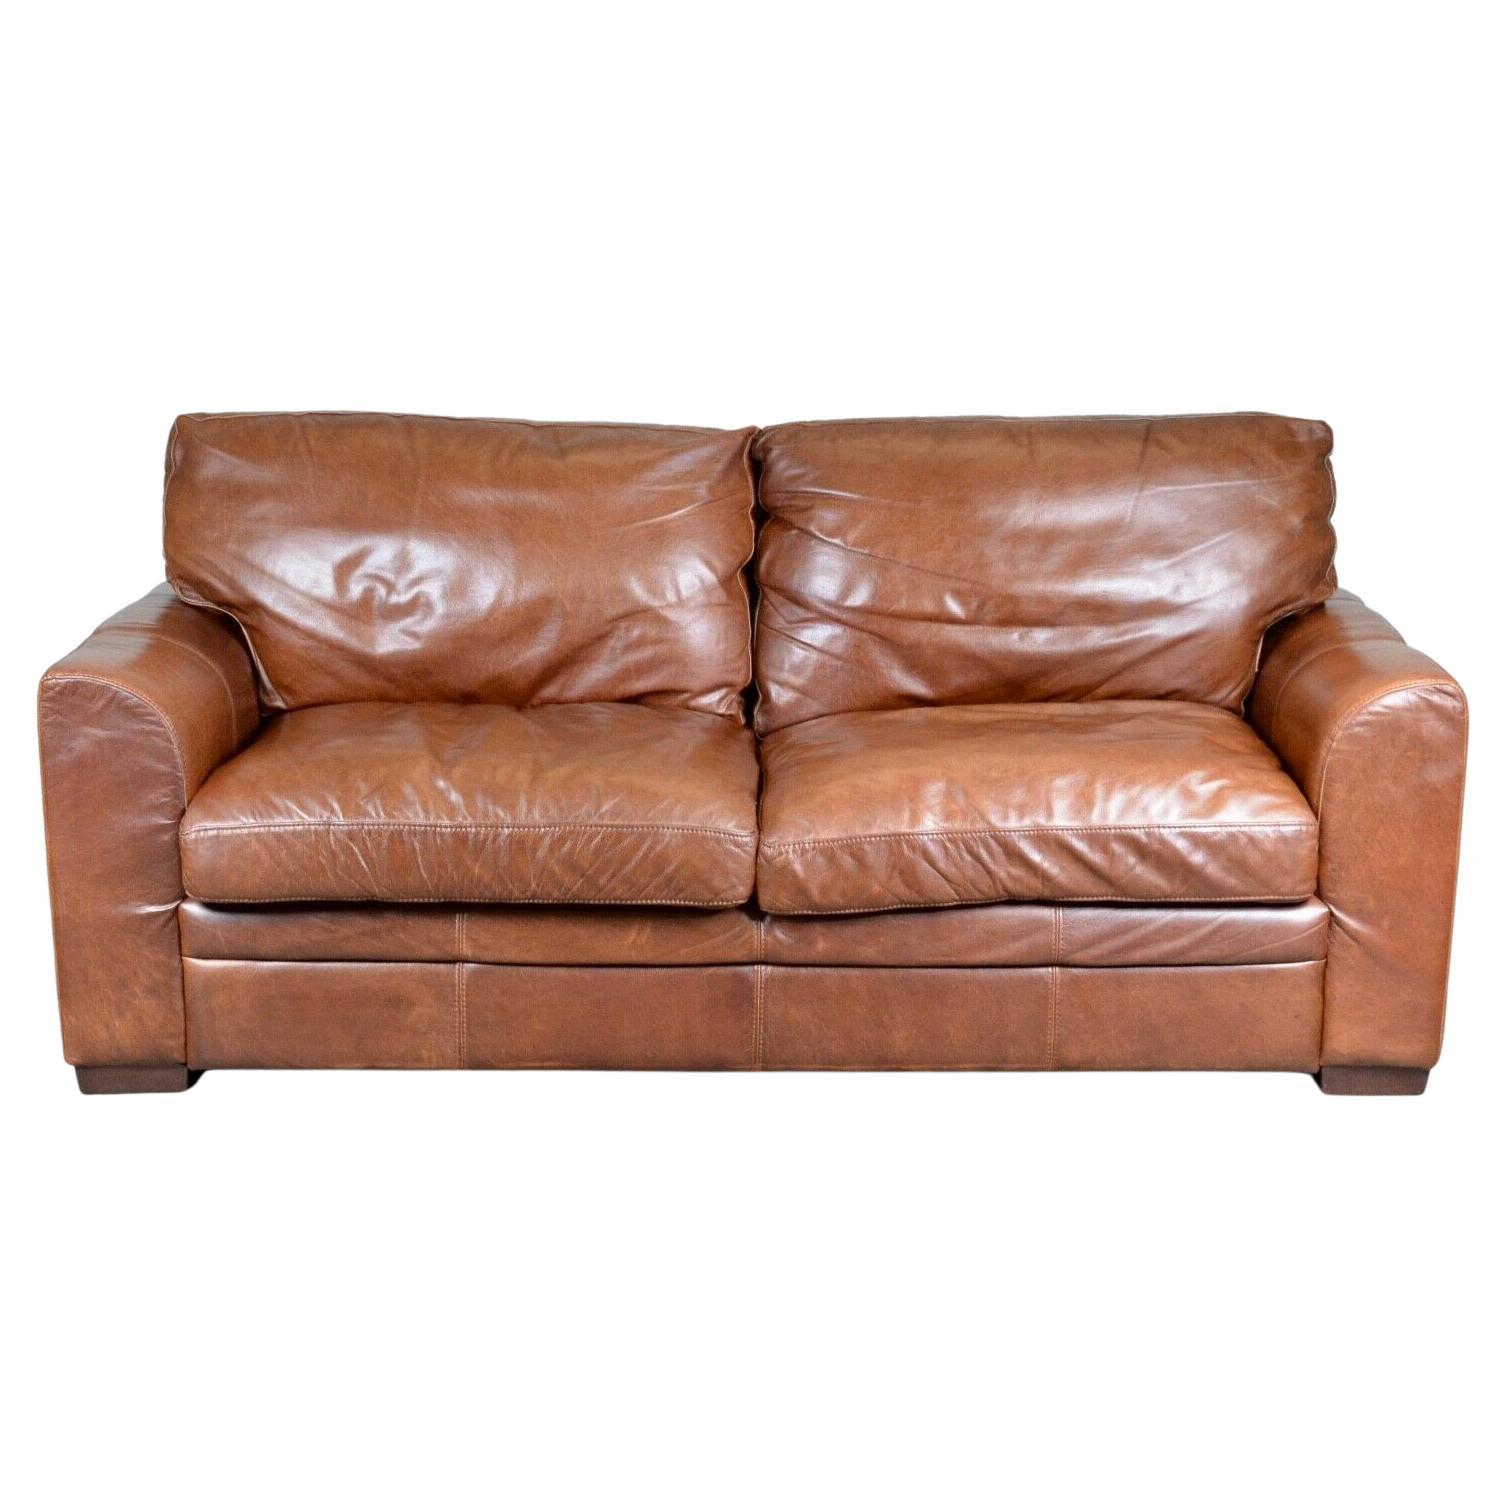 LUXURY VIVA ITALIAN DESIGNER TAN LEATHER 3 SEATER SOFA ARMCHAiR ALSO  AVAILABLE For Sale at 1stDibs | leather 3 seat sofa, 3 seater italian leather  sofa